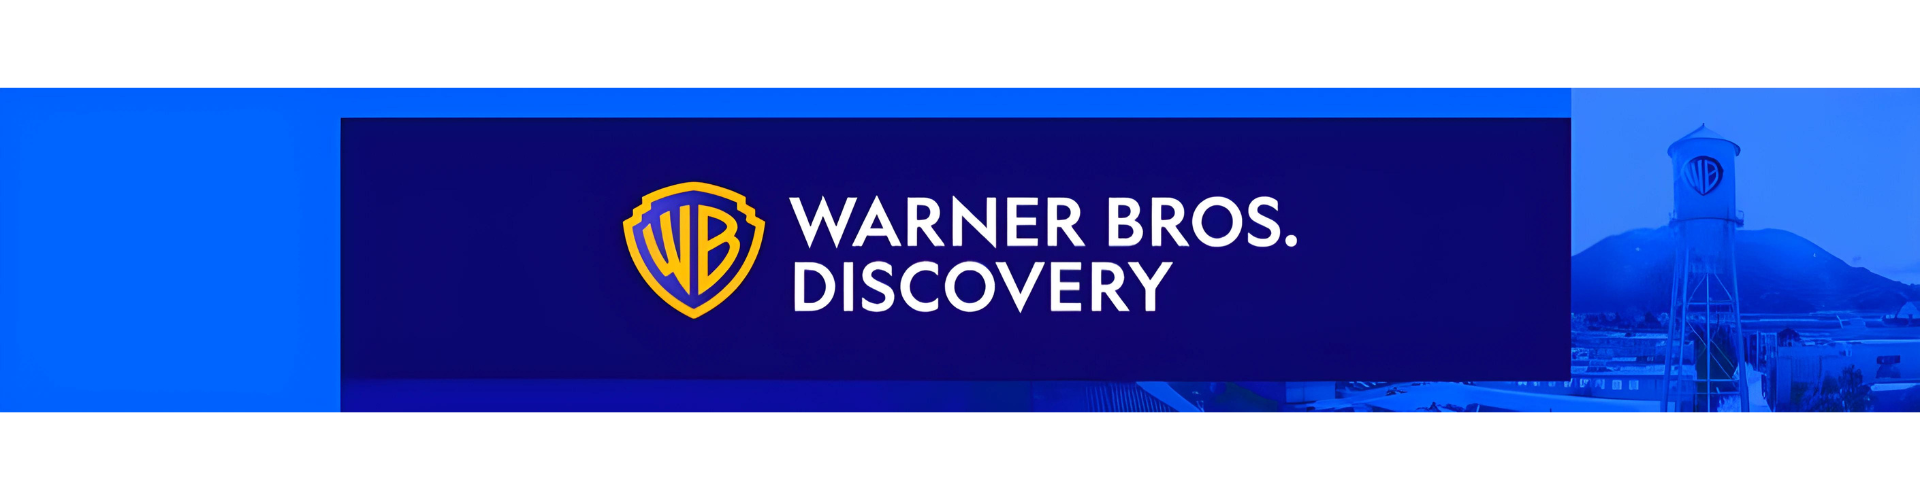 Warner Bros. Discovery cover